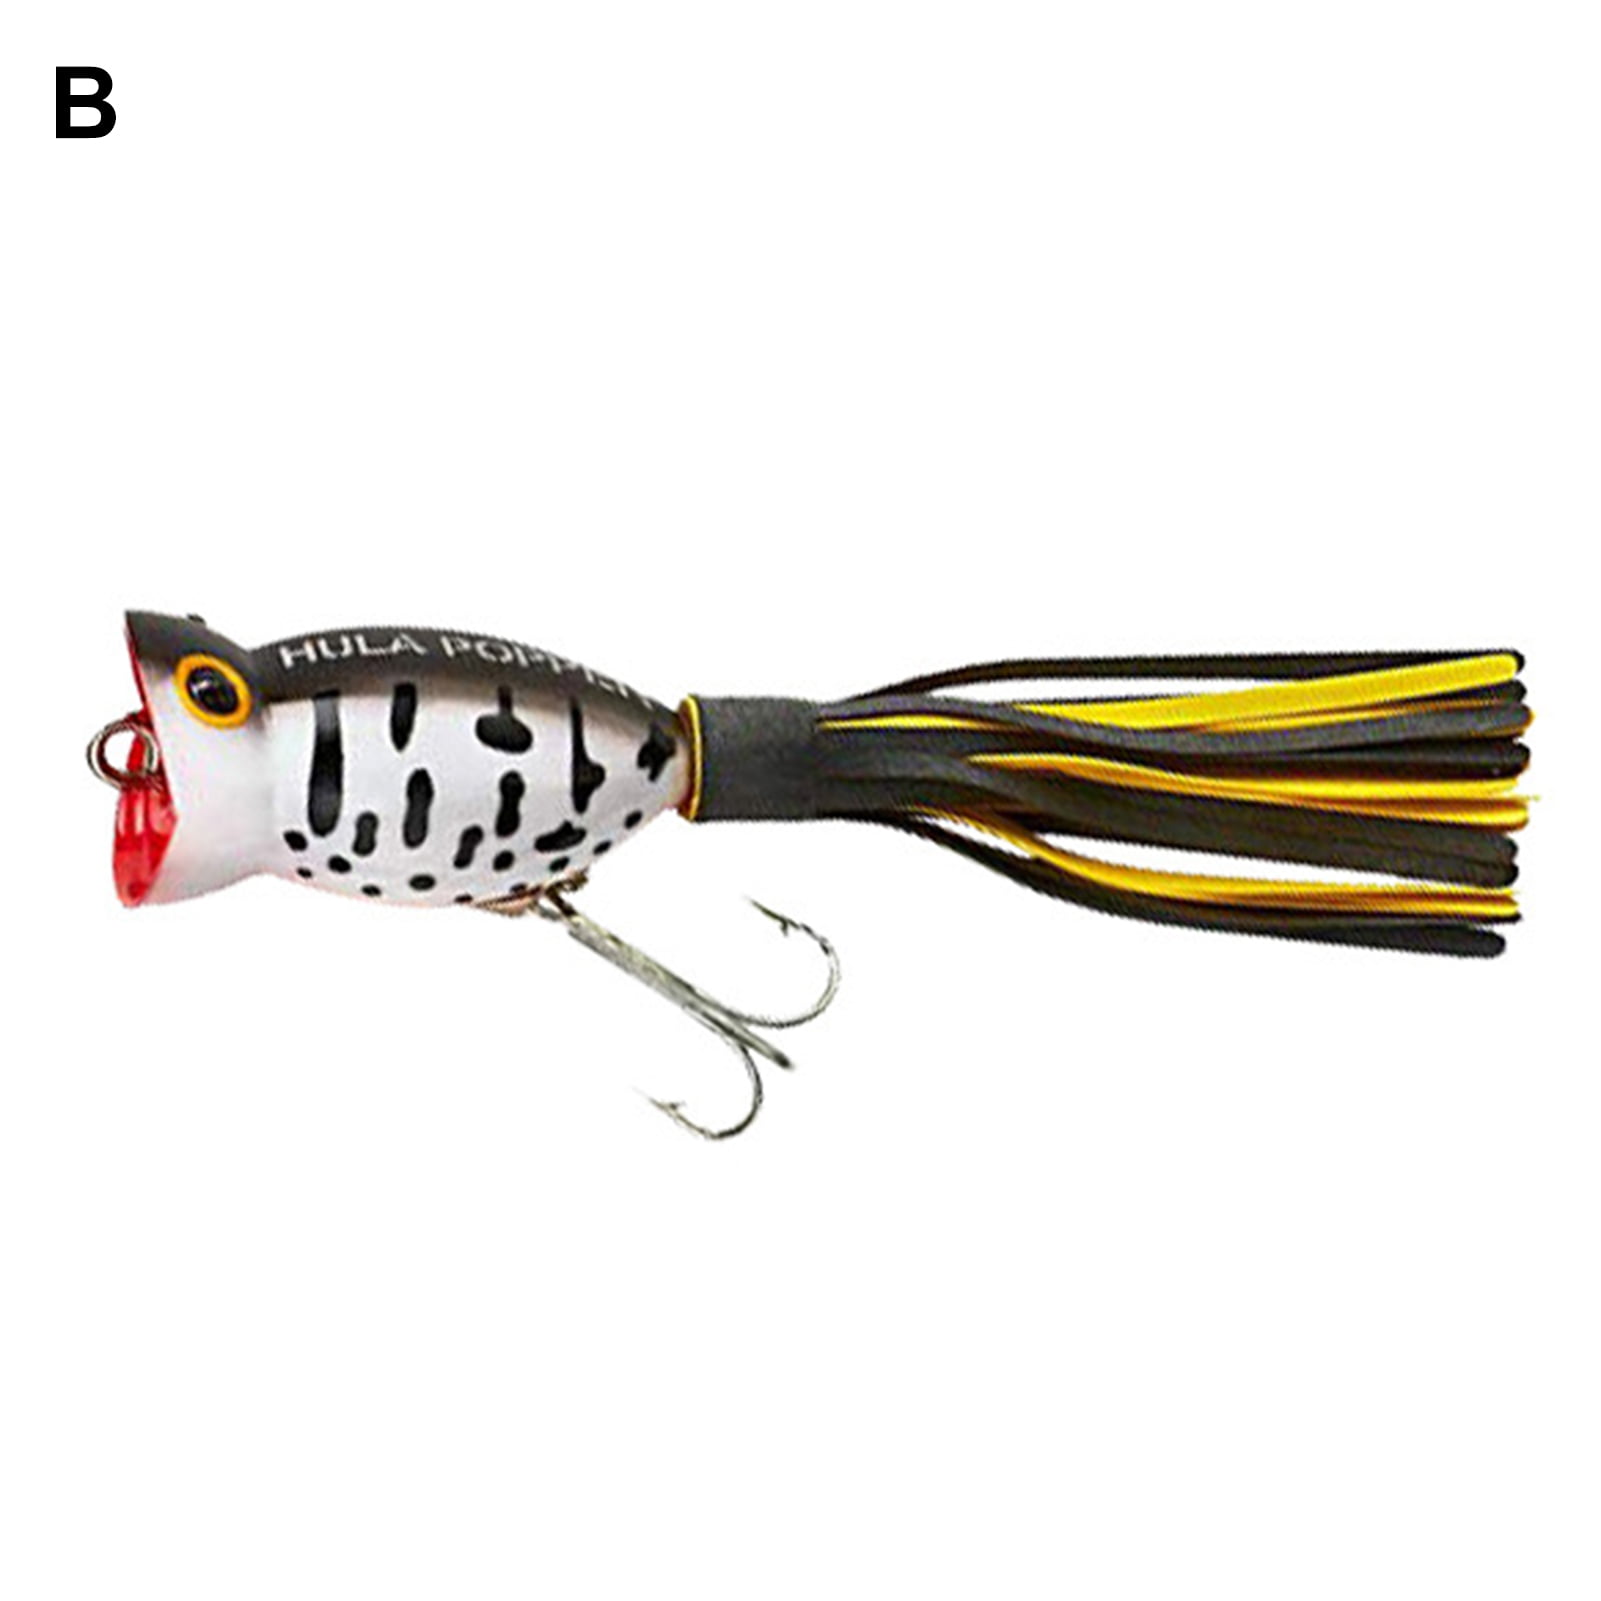 Rubber Fishing Lures On A Large Barbed Jig Hook With Copy Space